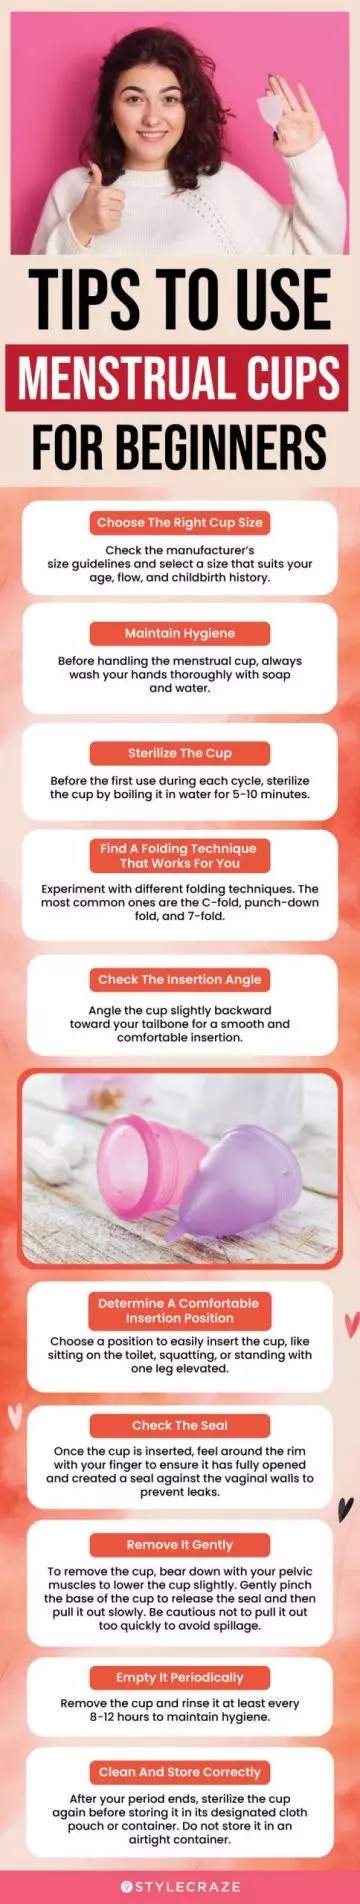 10 Tips On Using Menstrual Cups For Beginners(infographic)